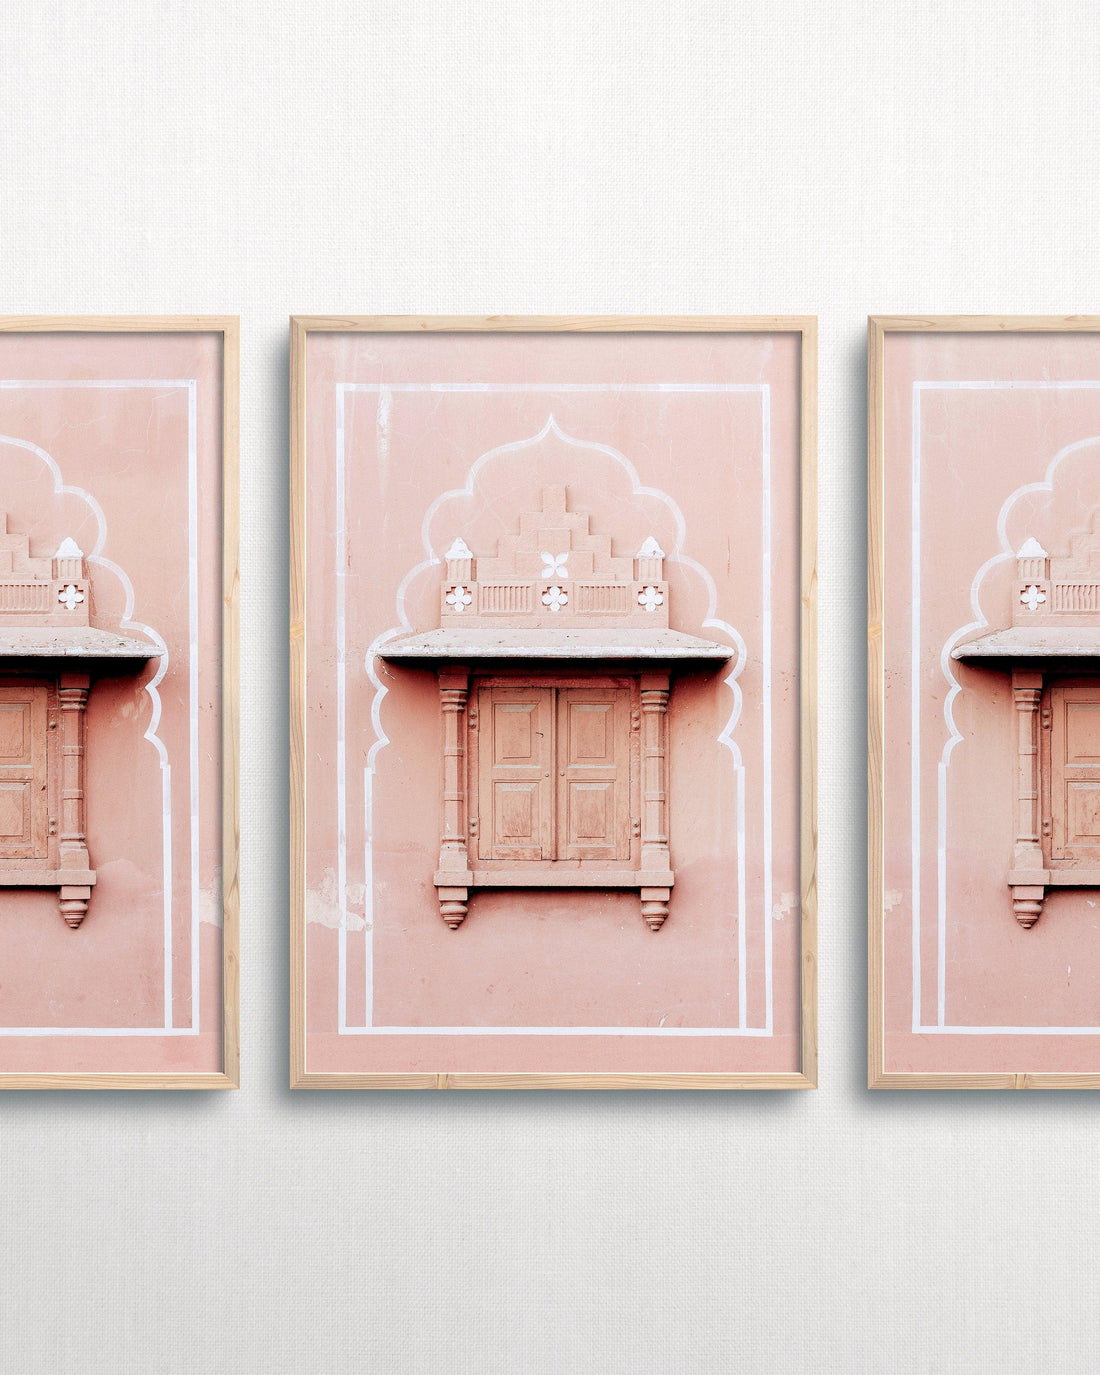 framed art piece on white wall. Photograph of pink architecture in India in frame